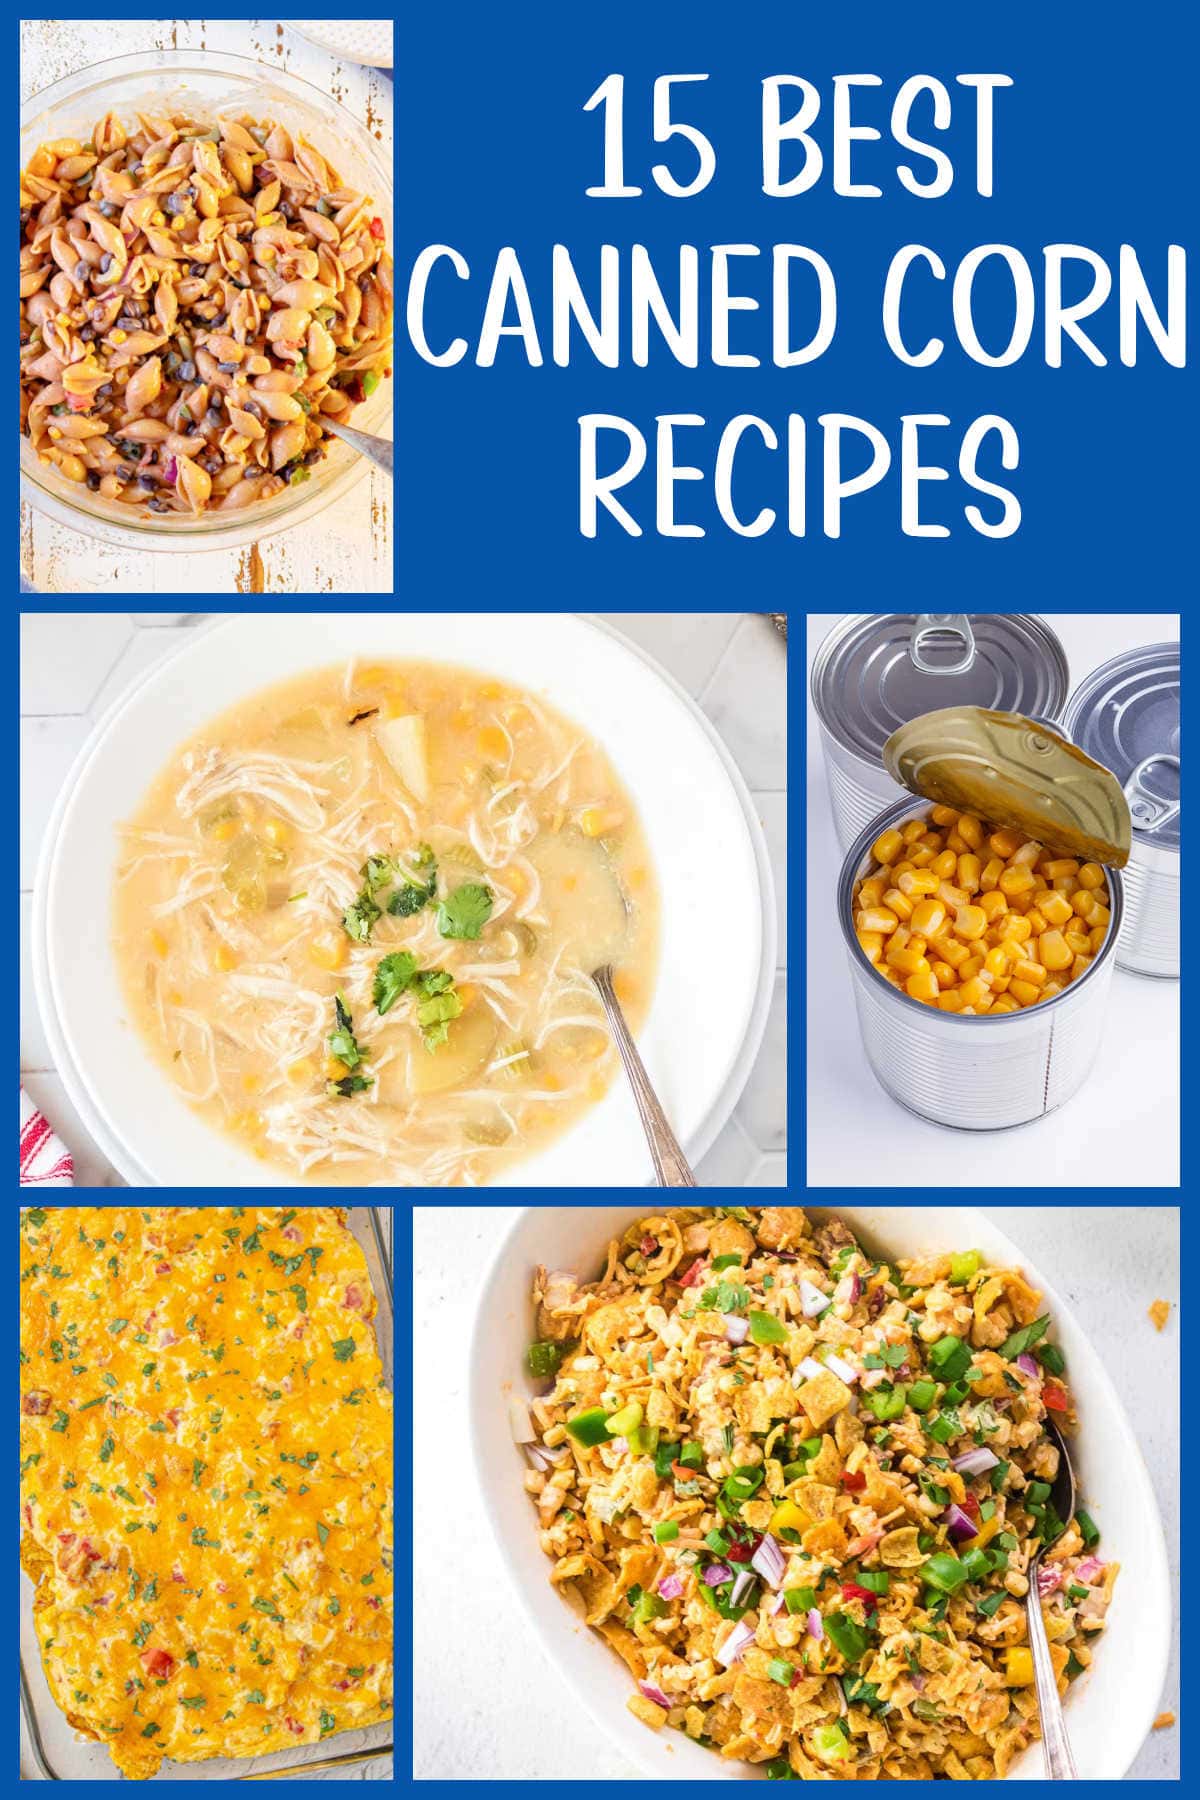 A collage of images of recipes made with canned corn. 